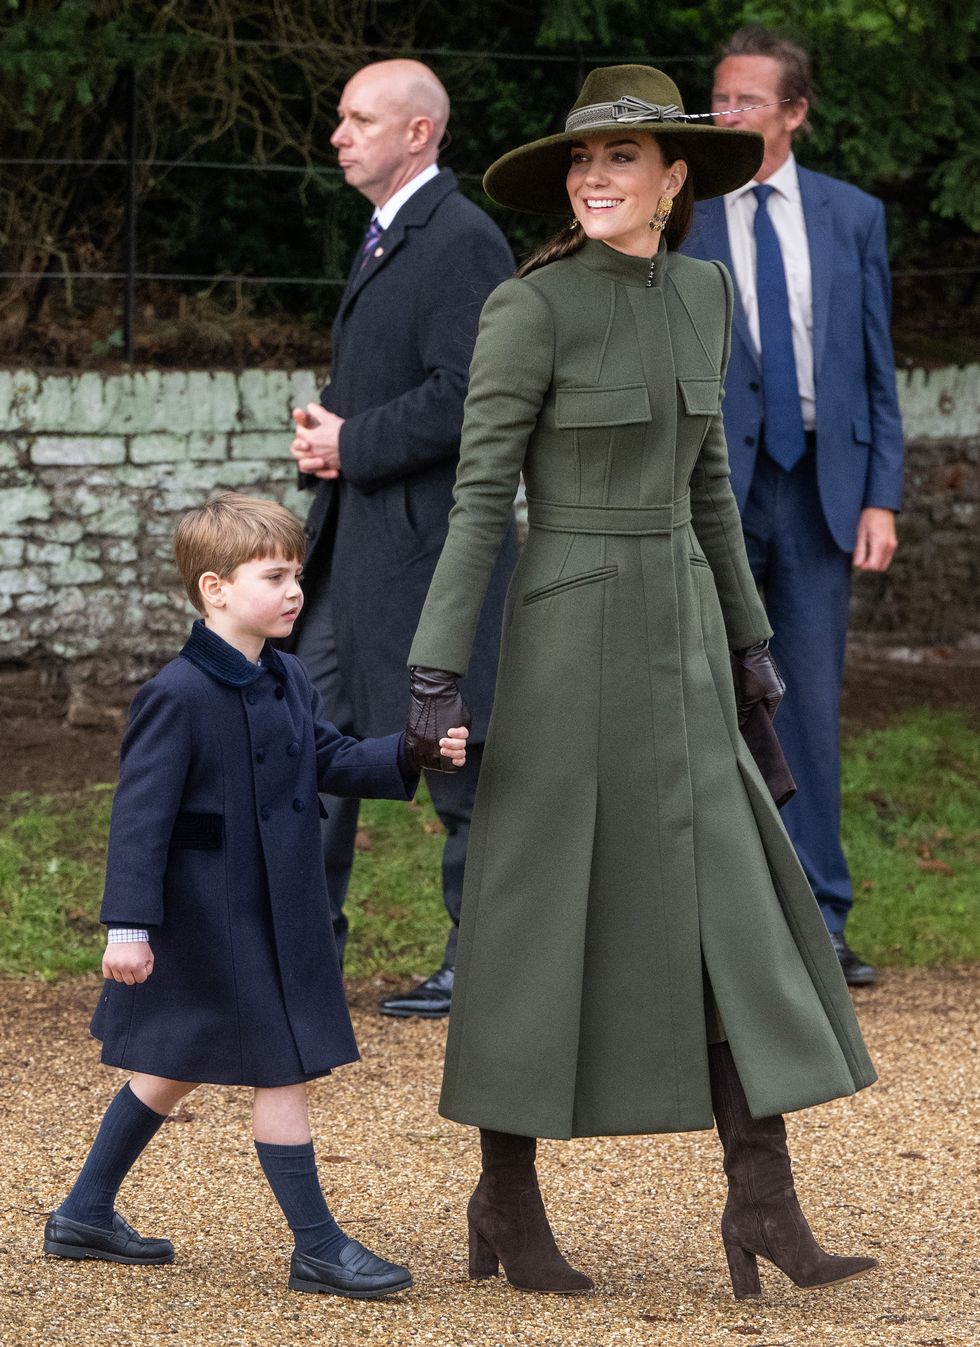 sandringham, norfolk december 25 prince louis and catherine, princess of wales attend the christmas day service at sandringham church on december 25, 2022 in sandringham, norfolk king charles iii ascended to the throne on september 8, 2022, with his coronation set for may 6, 2023 photo by samir husseinwireimage